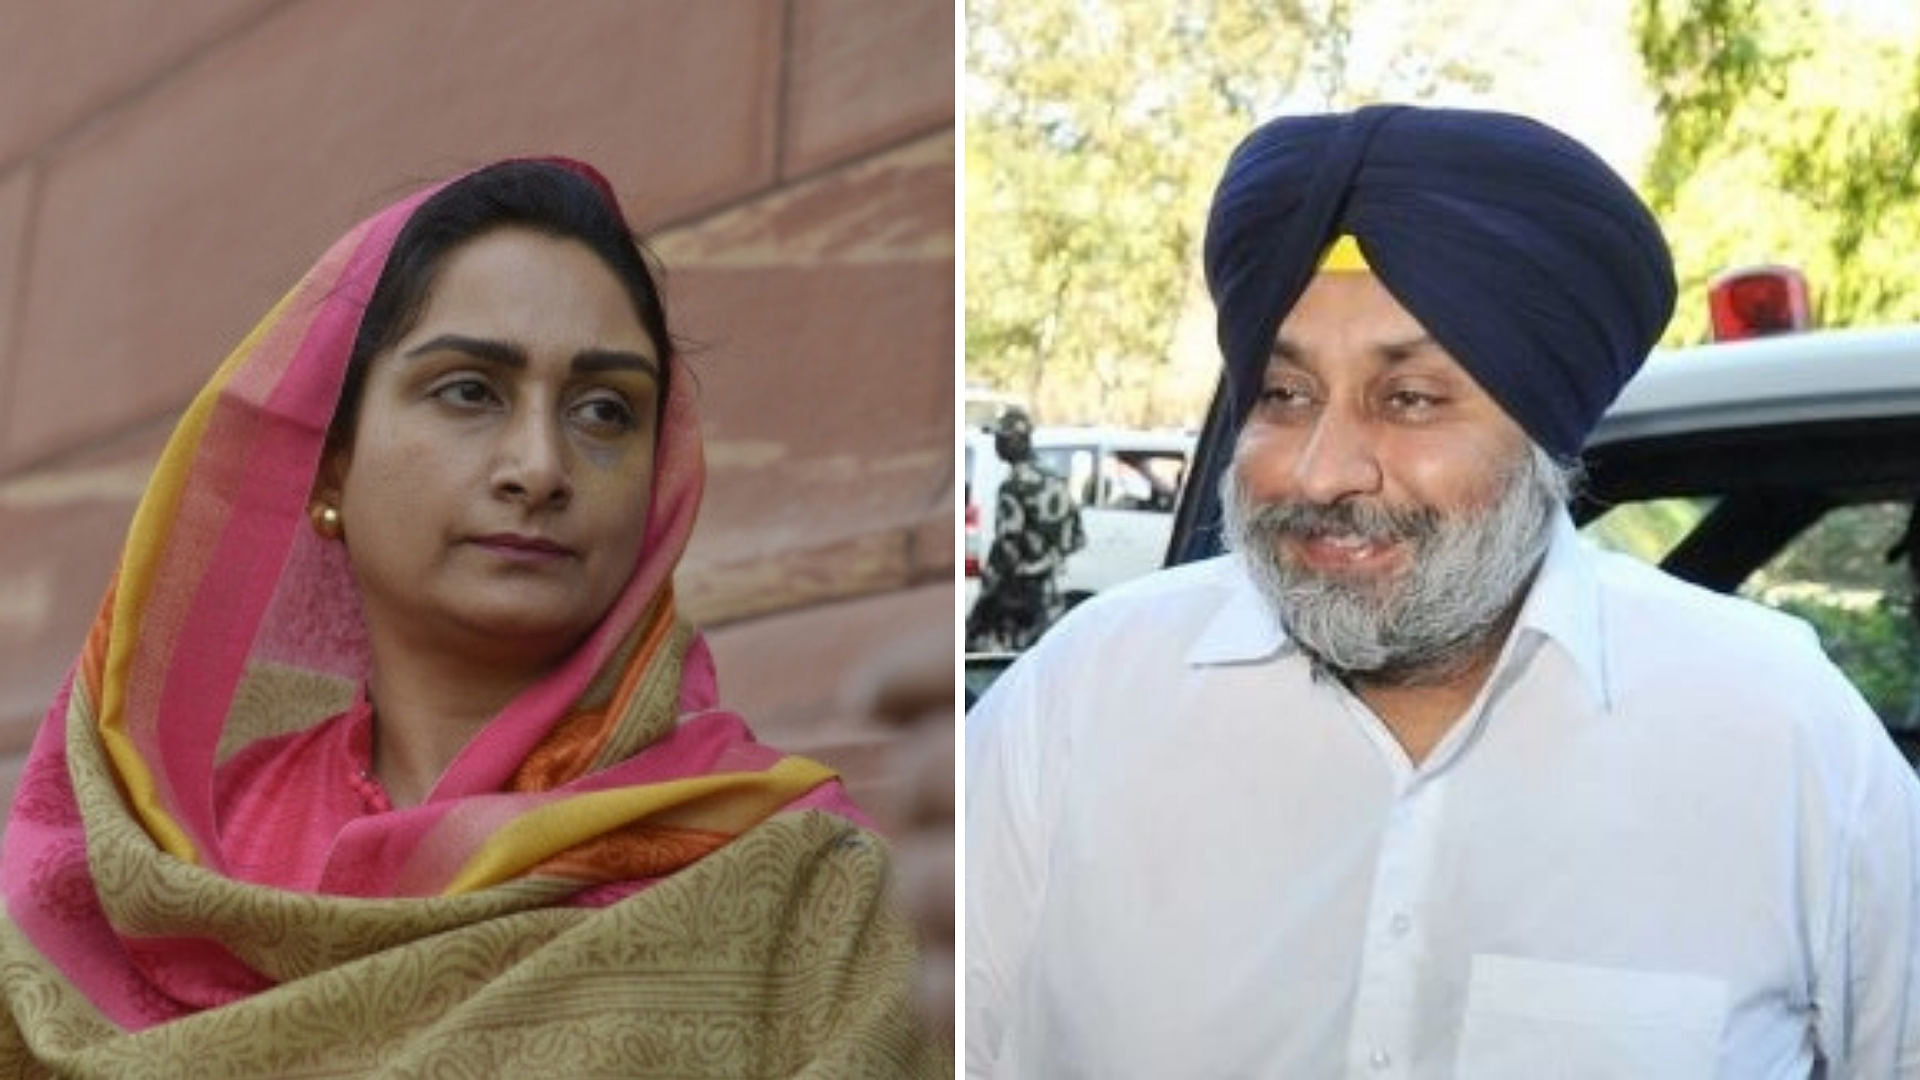 Party chief Sukhbir Singh Badal has been fielded from the Ferozepur seat while his wife and Union minister Harsimrat Kaur Badal has been nominated from the Bathinda seat.